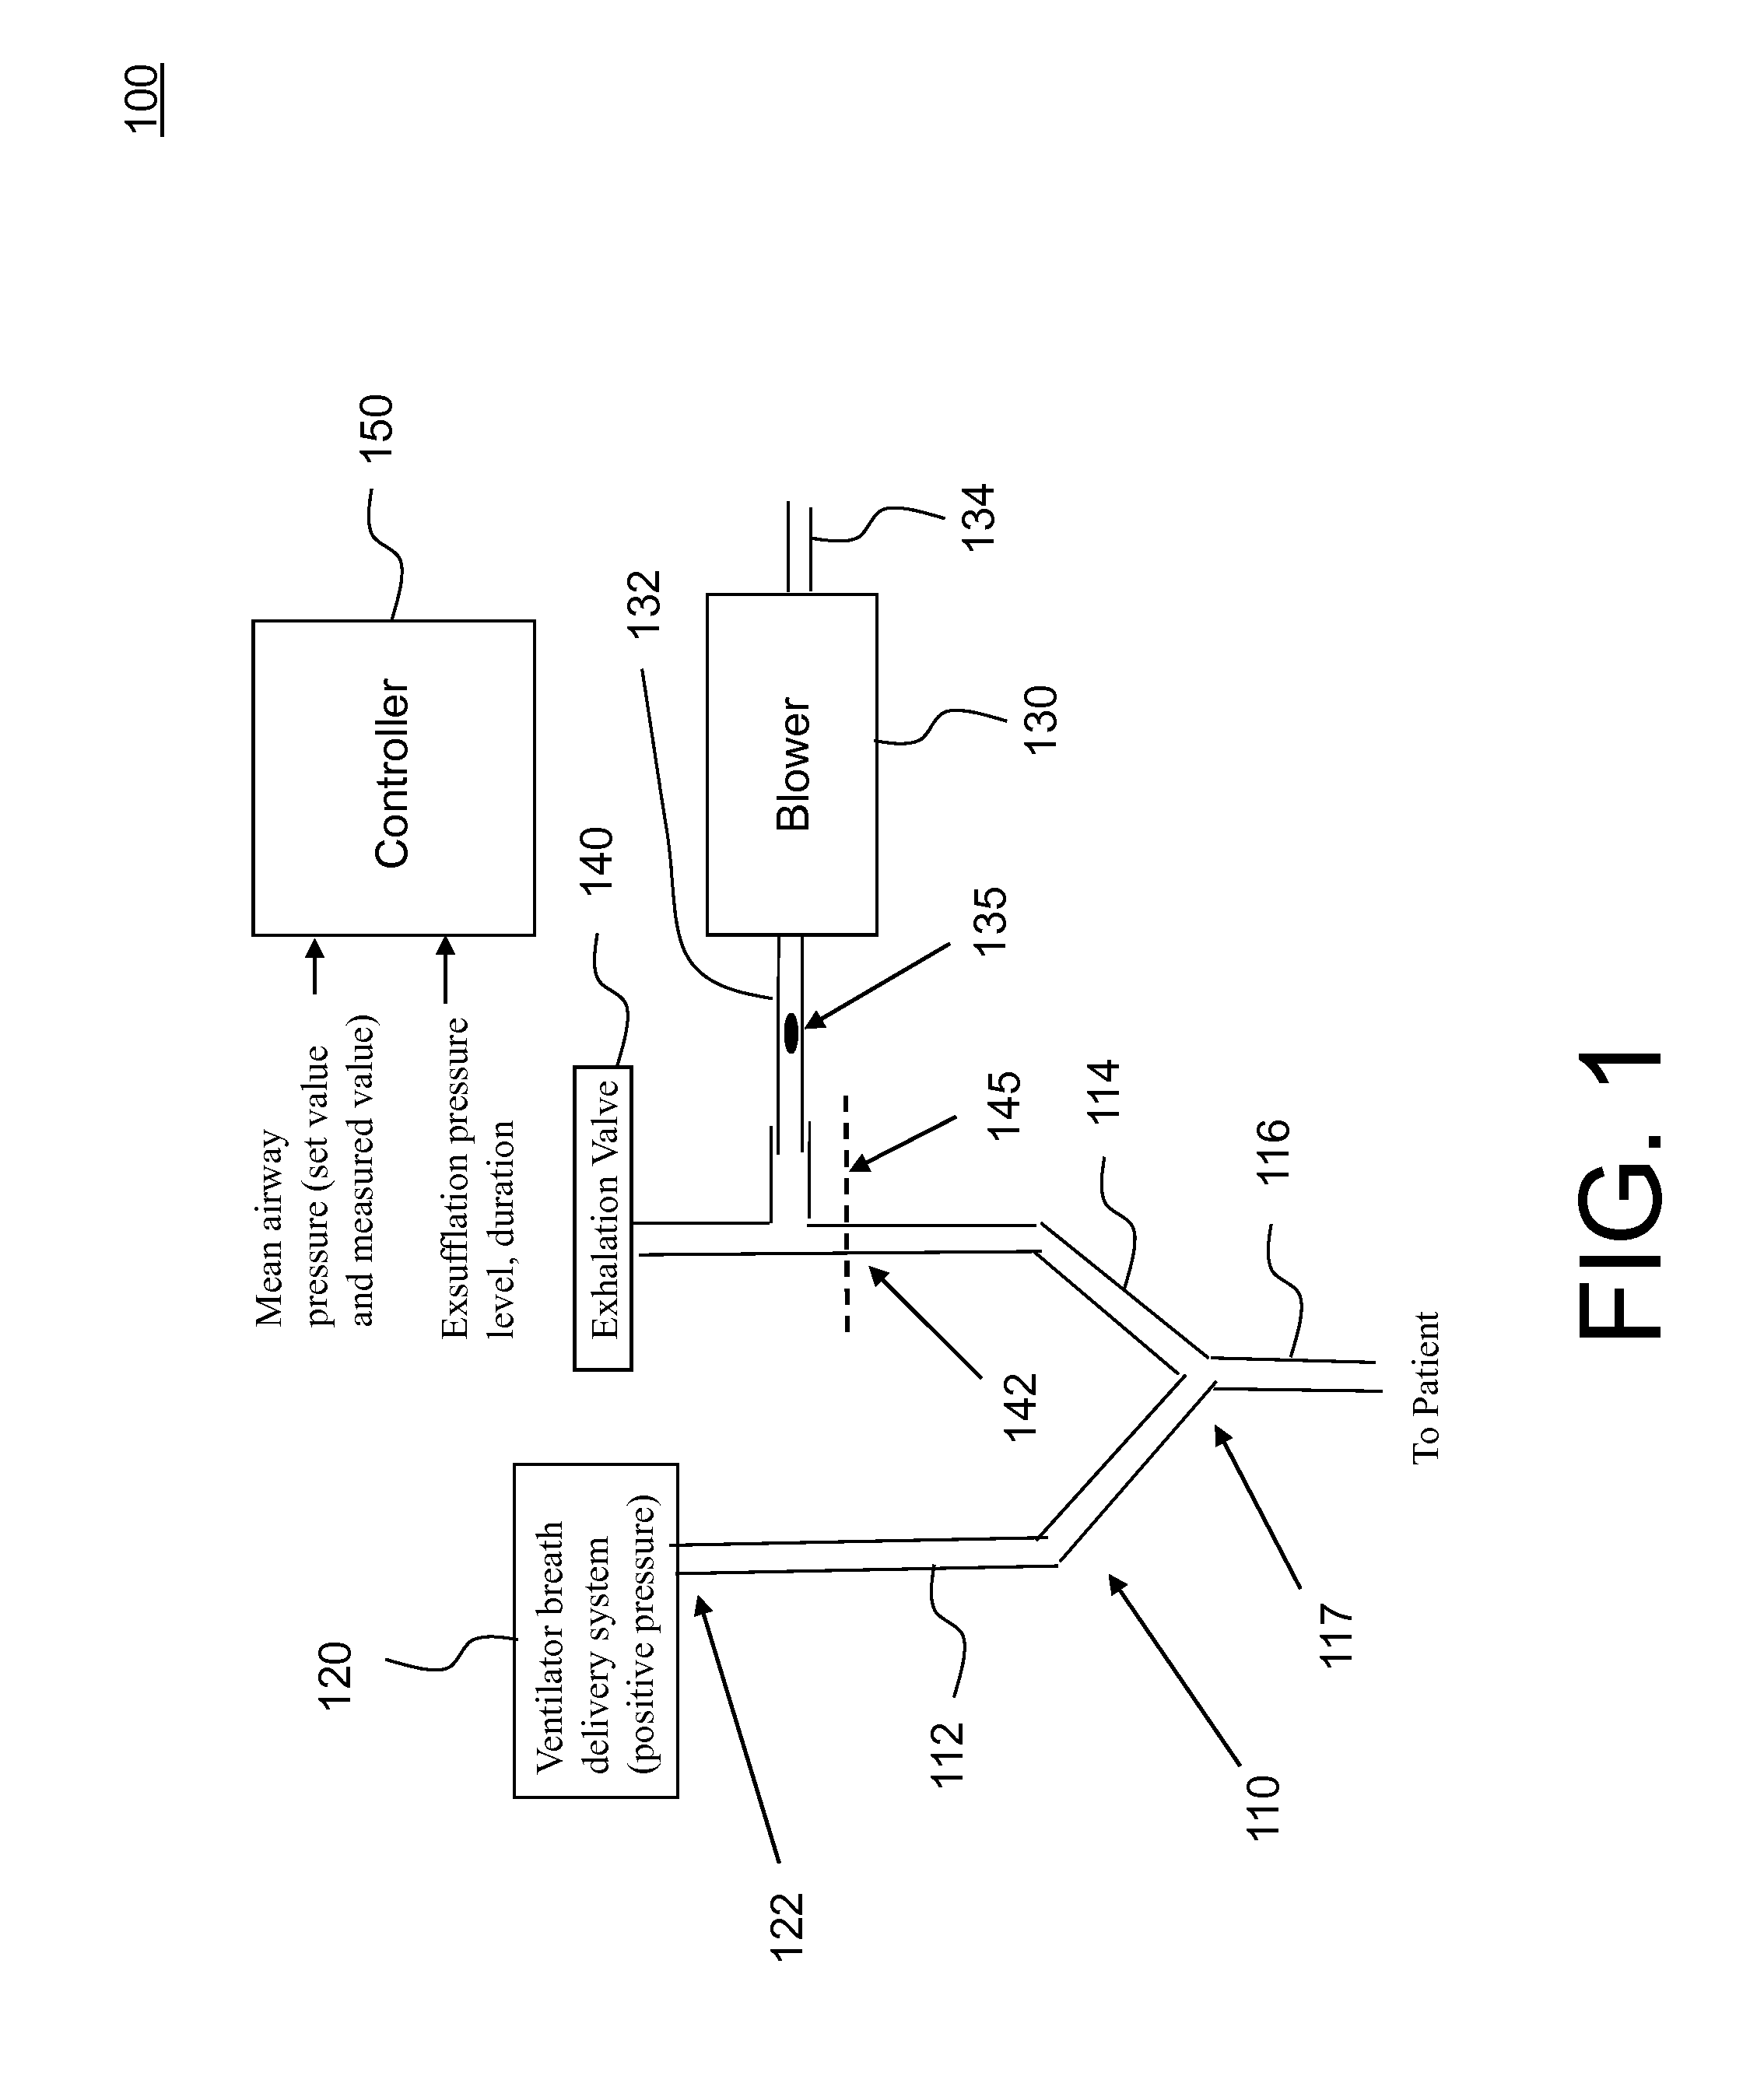 Ventilator with integrated blower to provide negative or positive pressure in a ventilator system